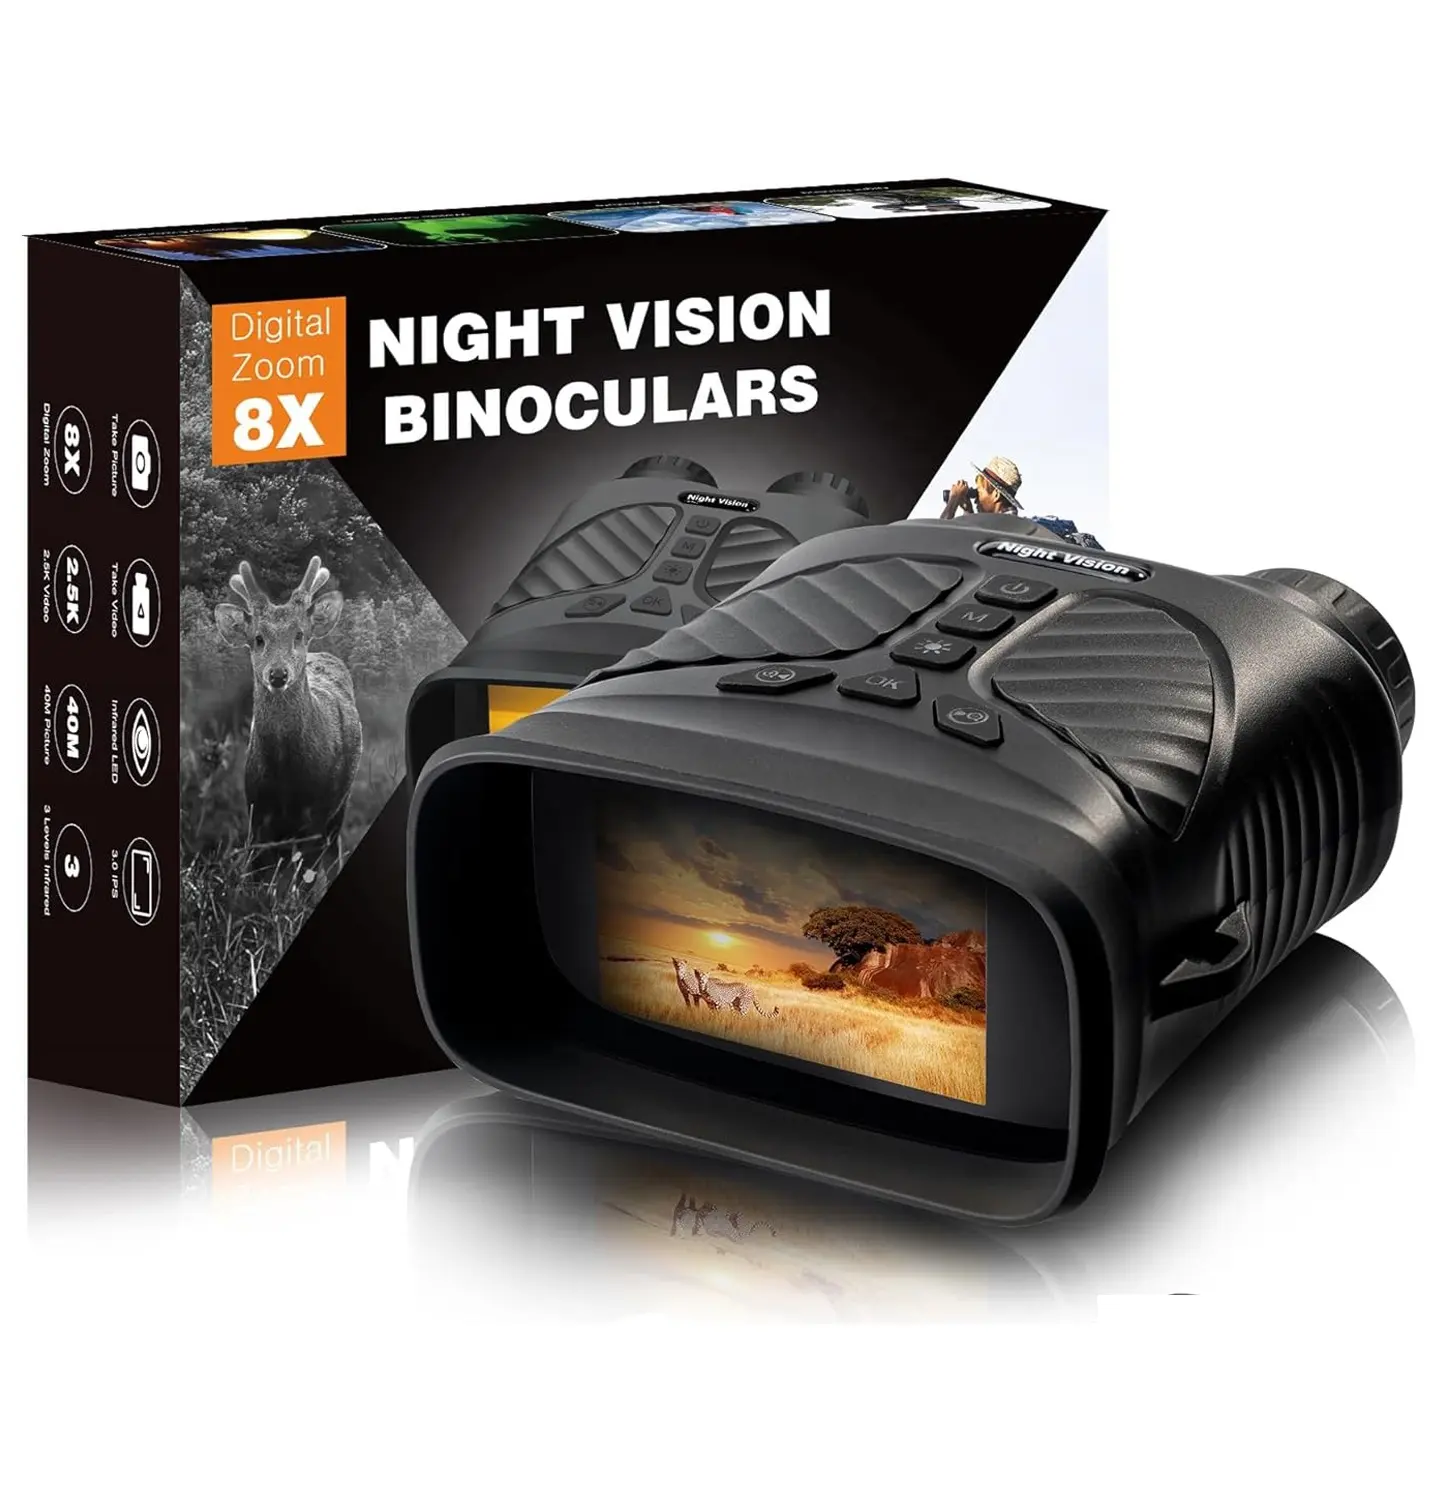 New DT39 Night Vision Binoculars 2.5K resolution 300m view 8X digital zoom backlight button infrared night vision goggles